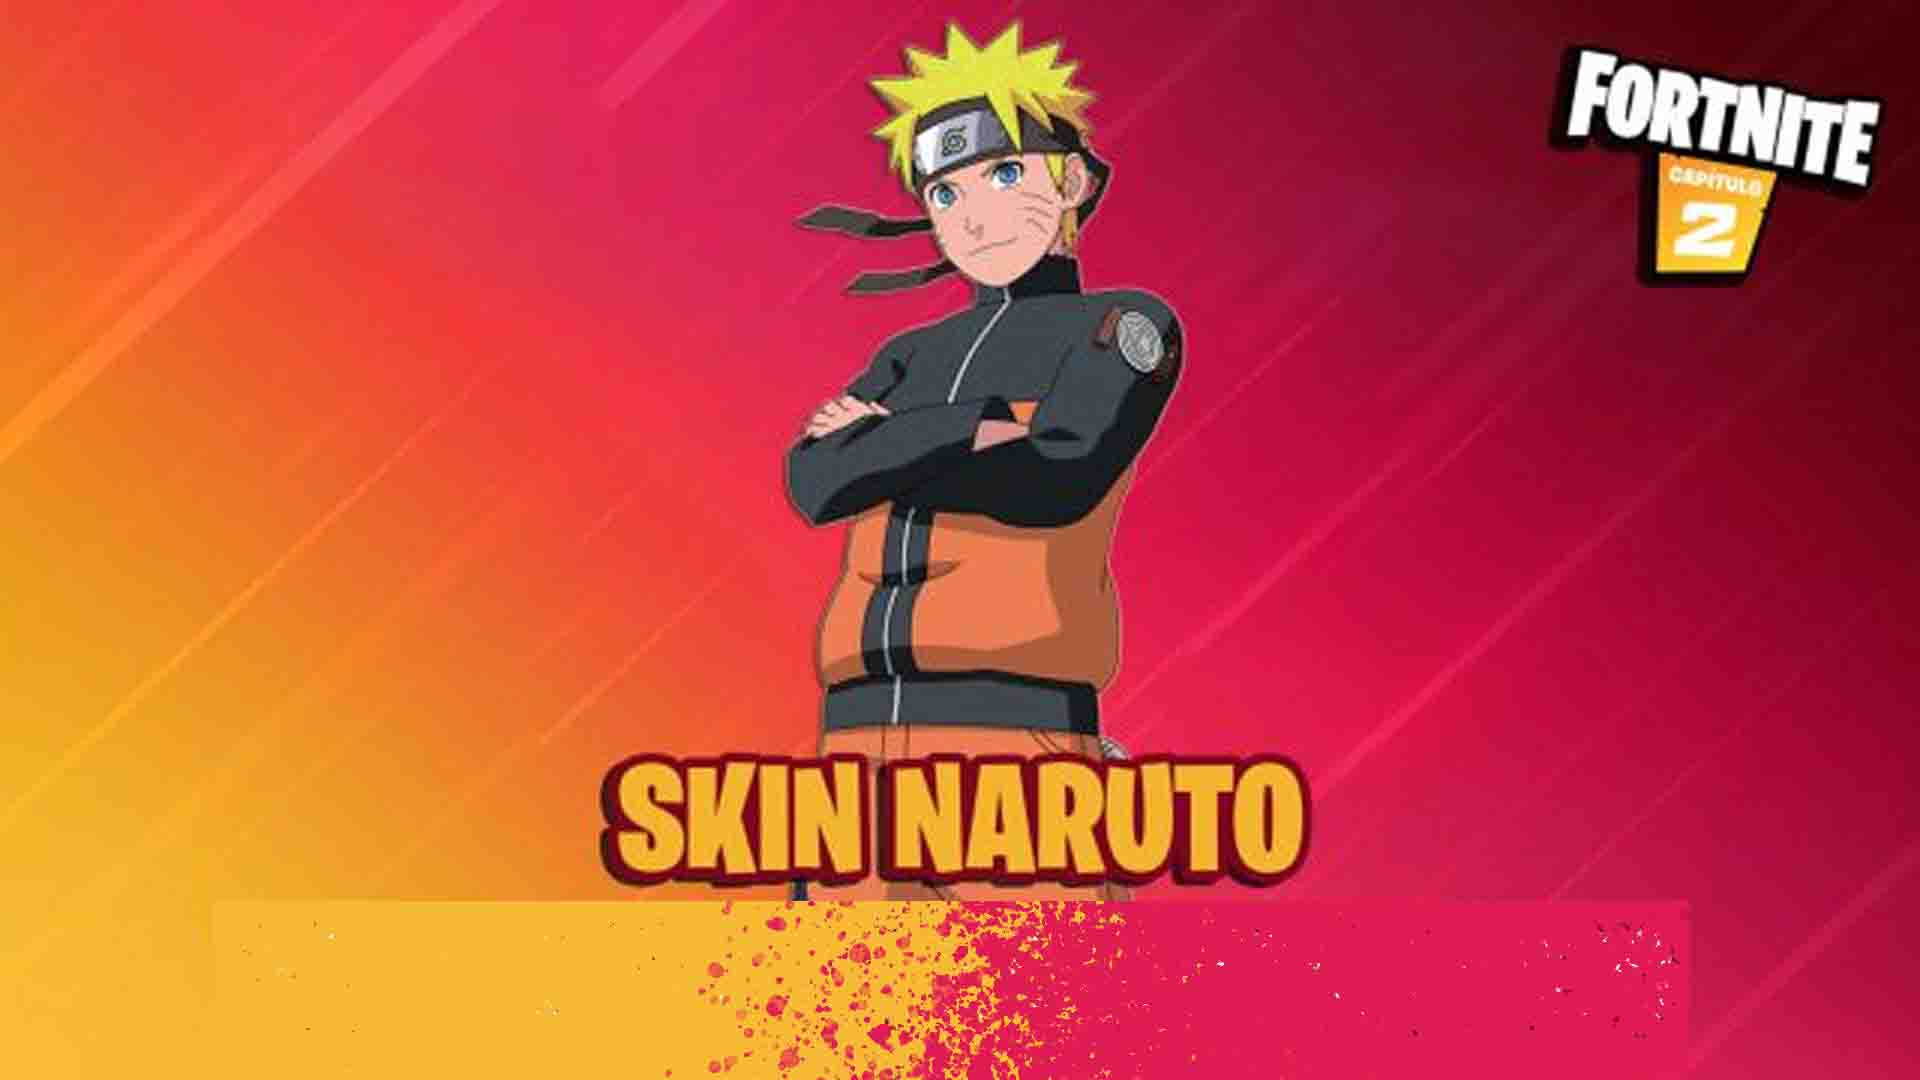 Fortnite x Naruto is now official: skin release date confirmed